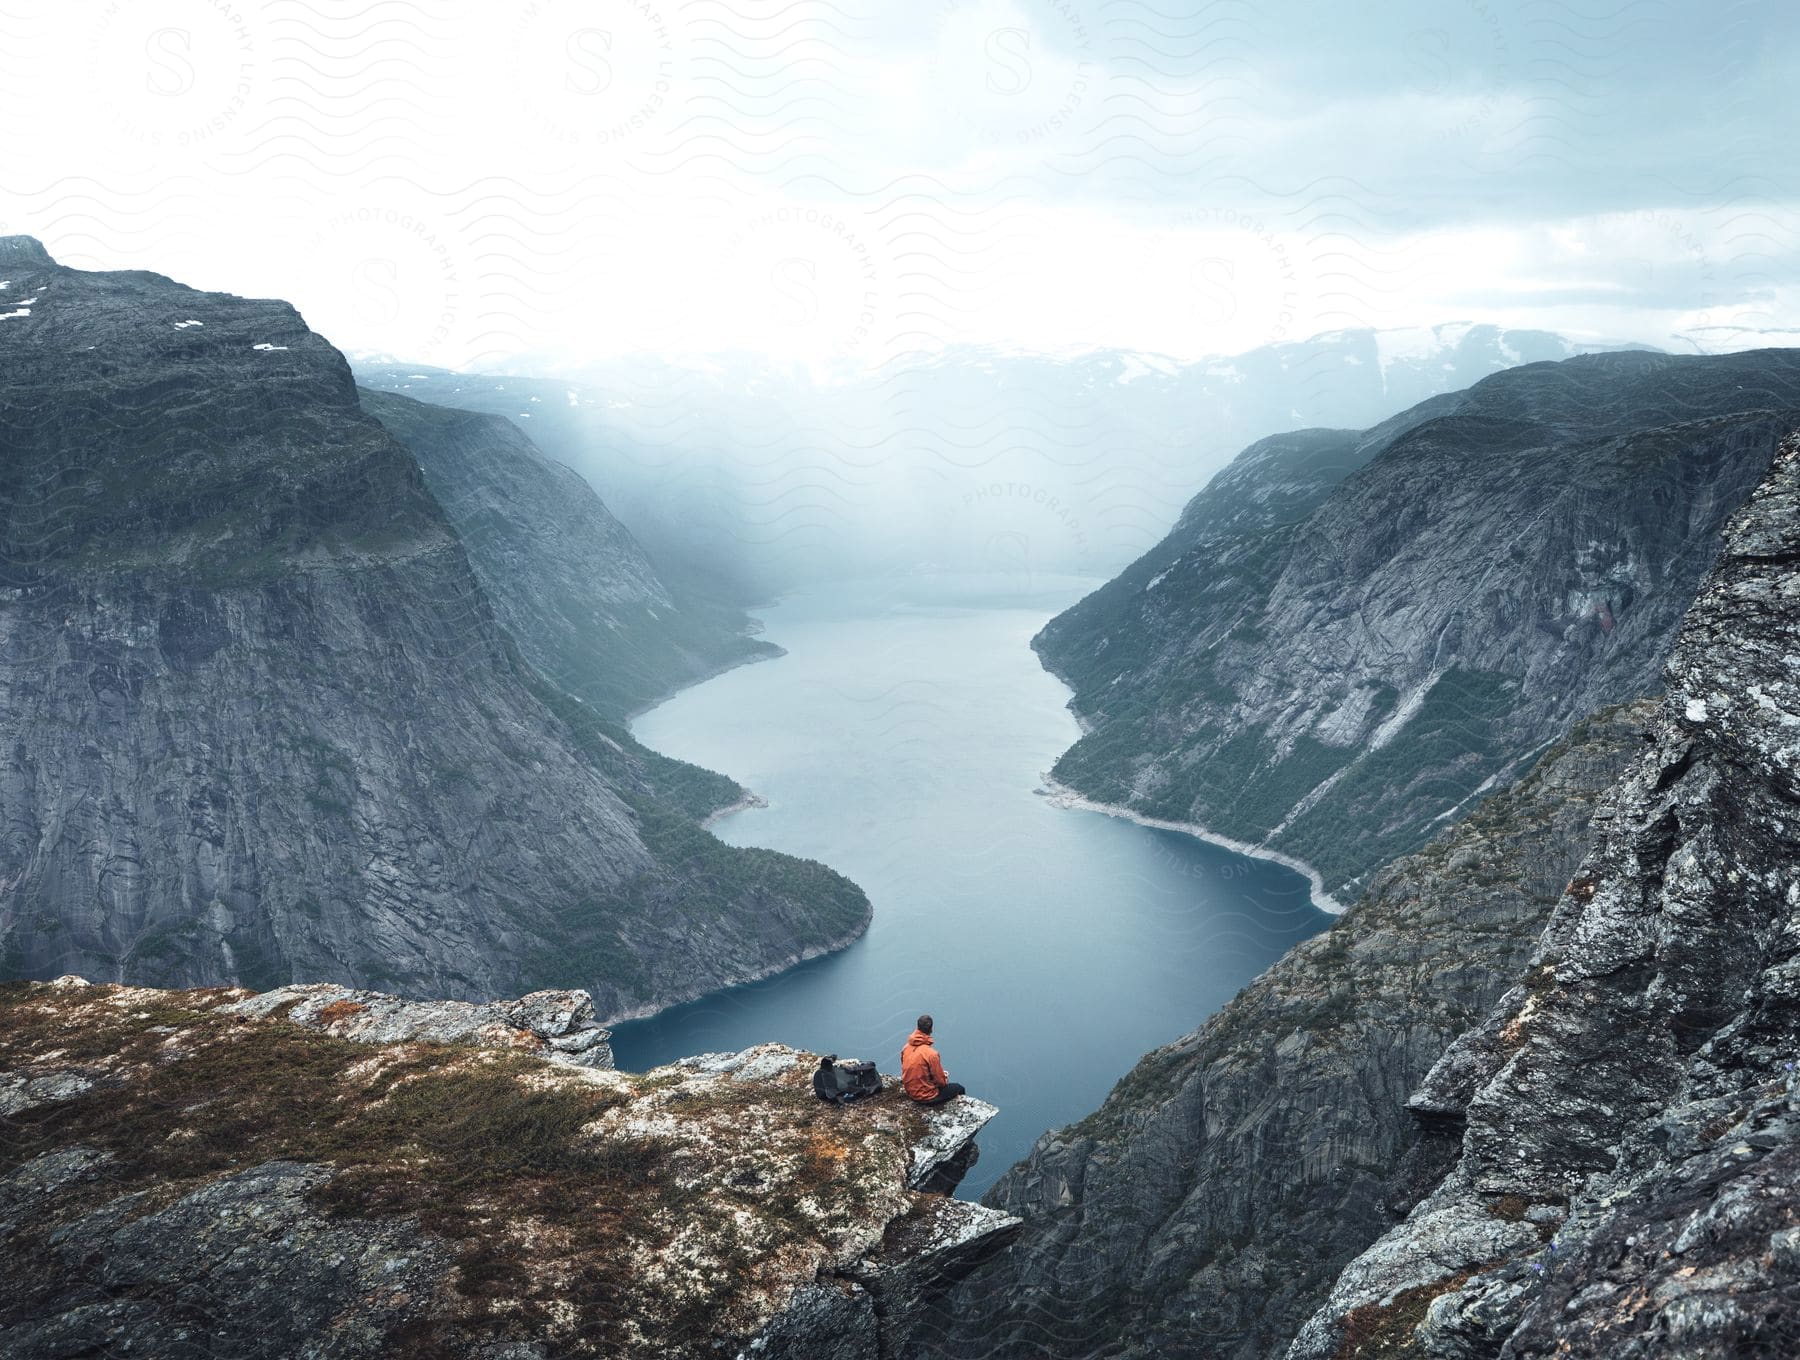 Stock photo of man in orange jacket sitting on mountain edge looking at mountain range and wide river